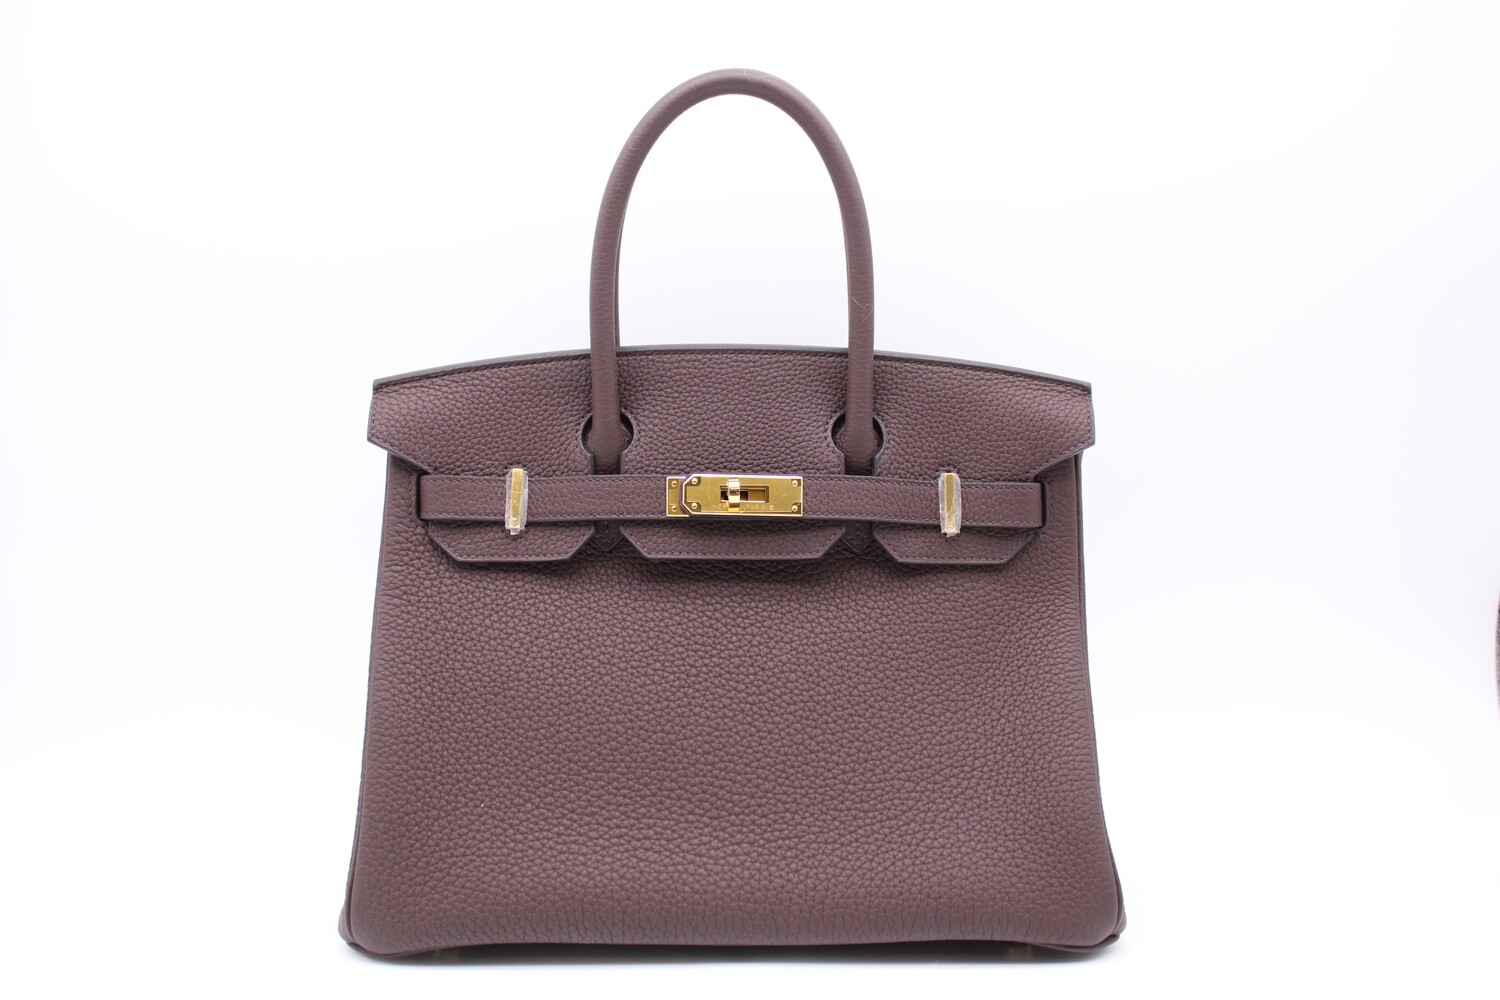 Hermes Birkin 30, Rouge H Sellier Togo Leather, Gold Hardware, New in Box CMA001